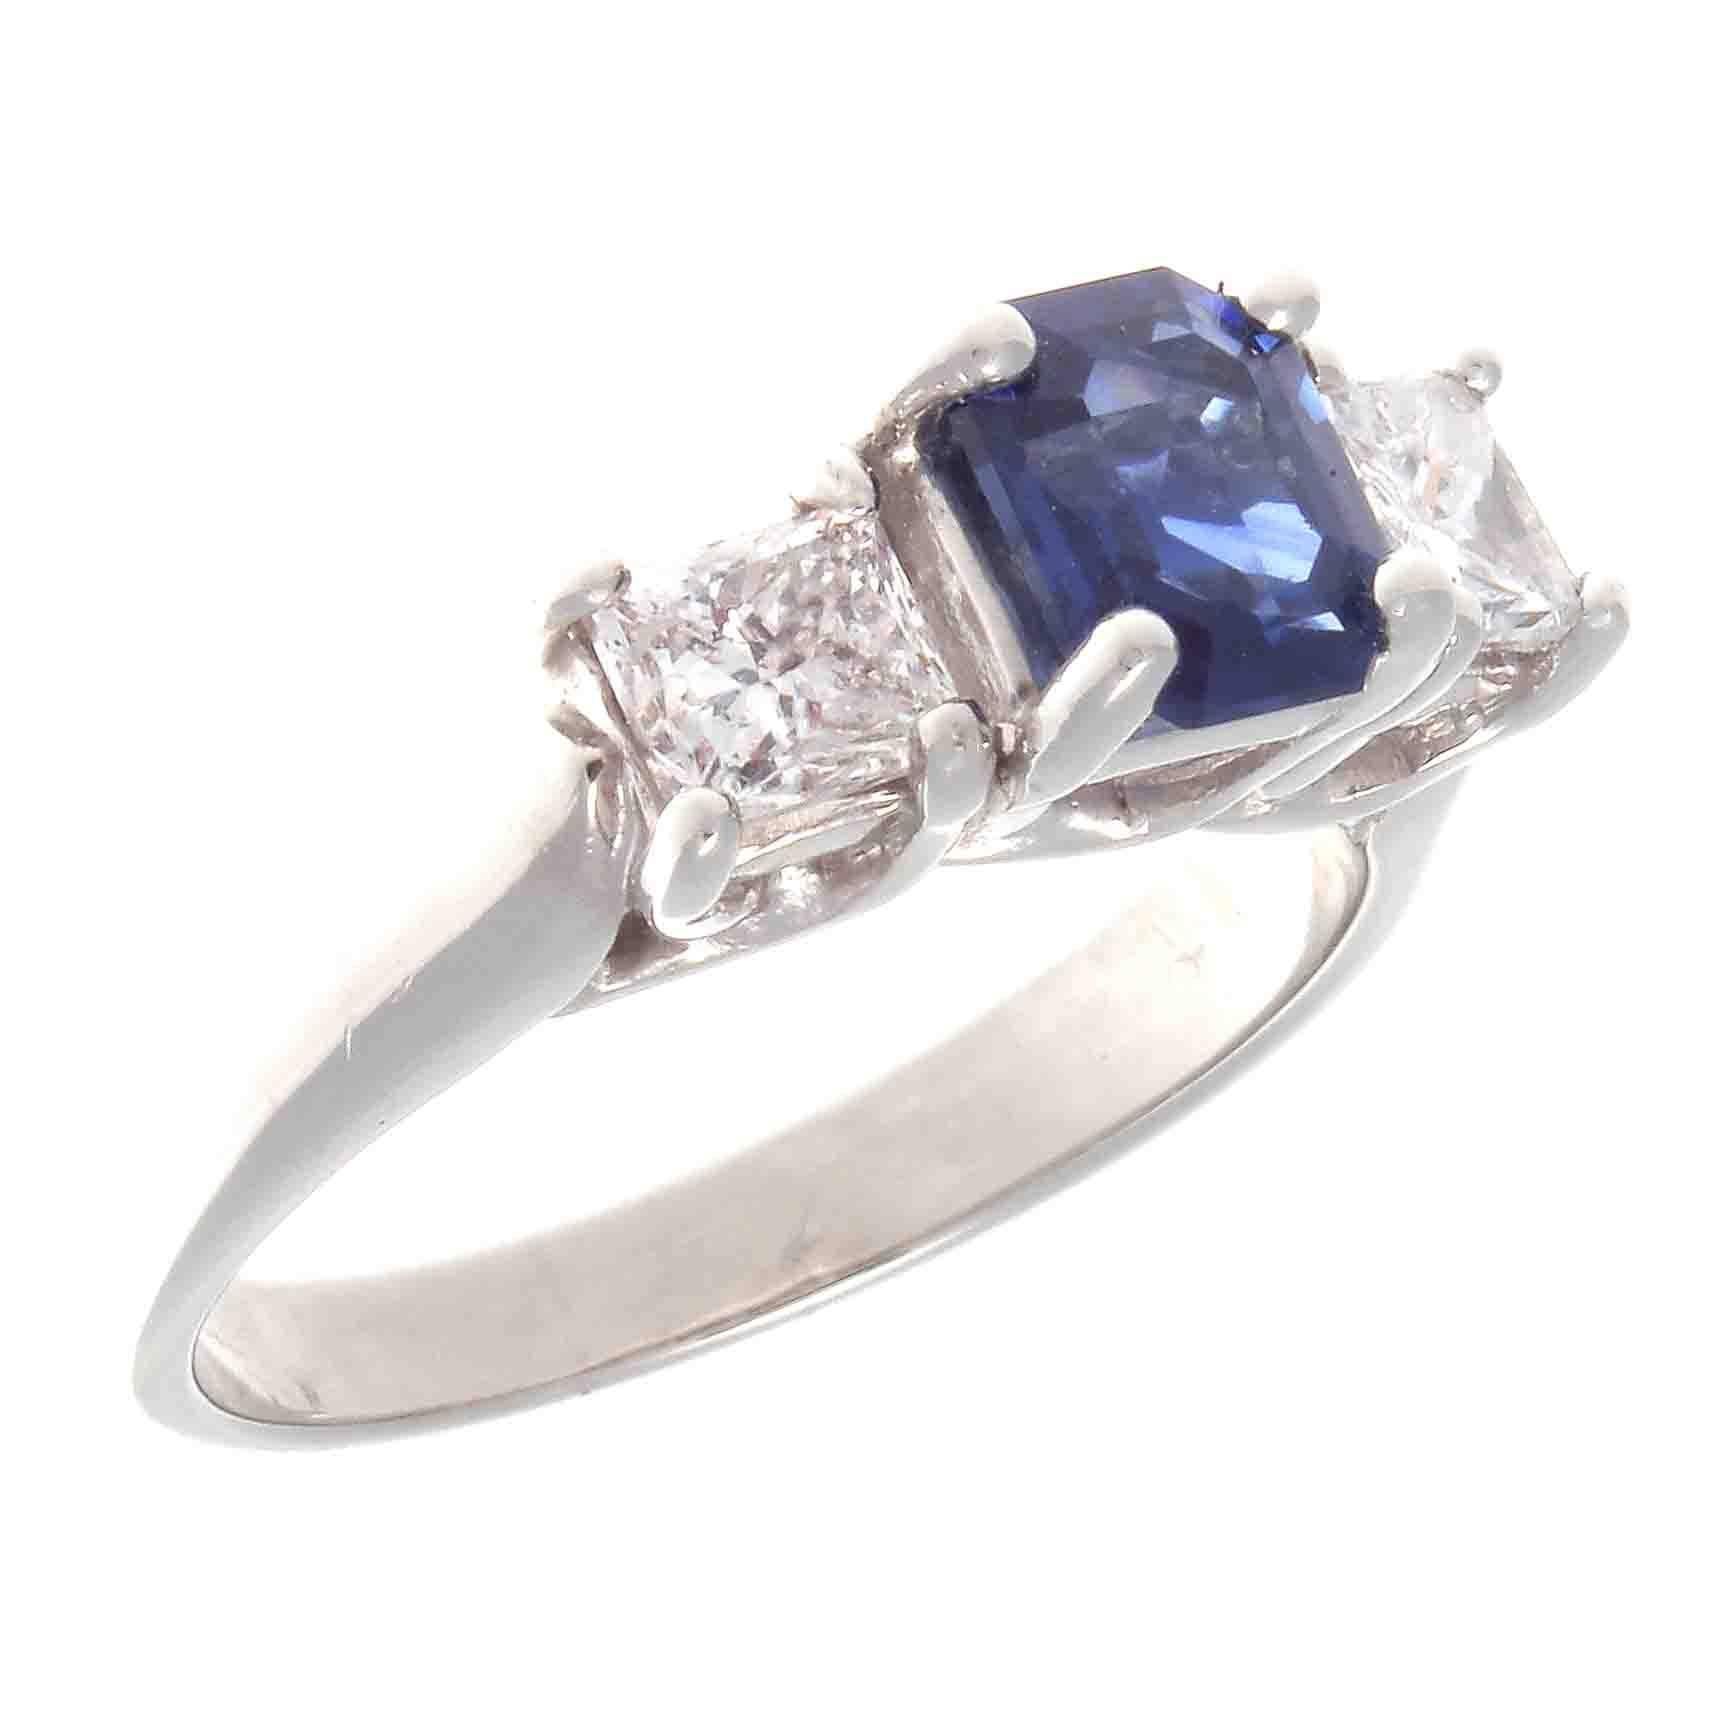 A classic creation of style and grace that has survived many decades of change. Featuring a vivid royal blue emerald cut sapphire that weighs approximately 1.10 carats. Perfectly complimented on either side by a single near colorless princess cut